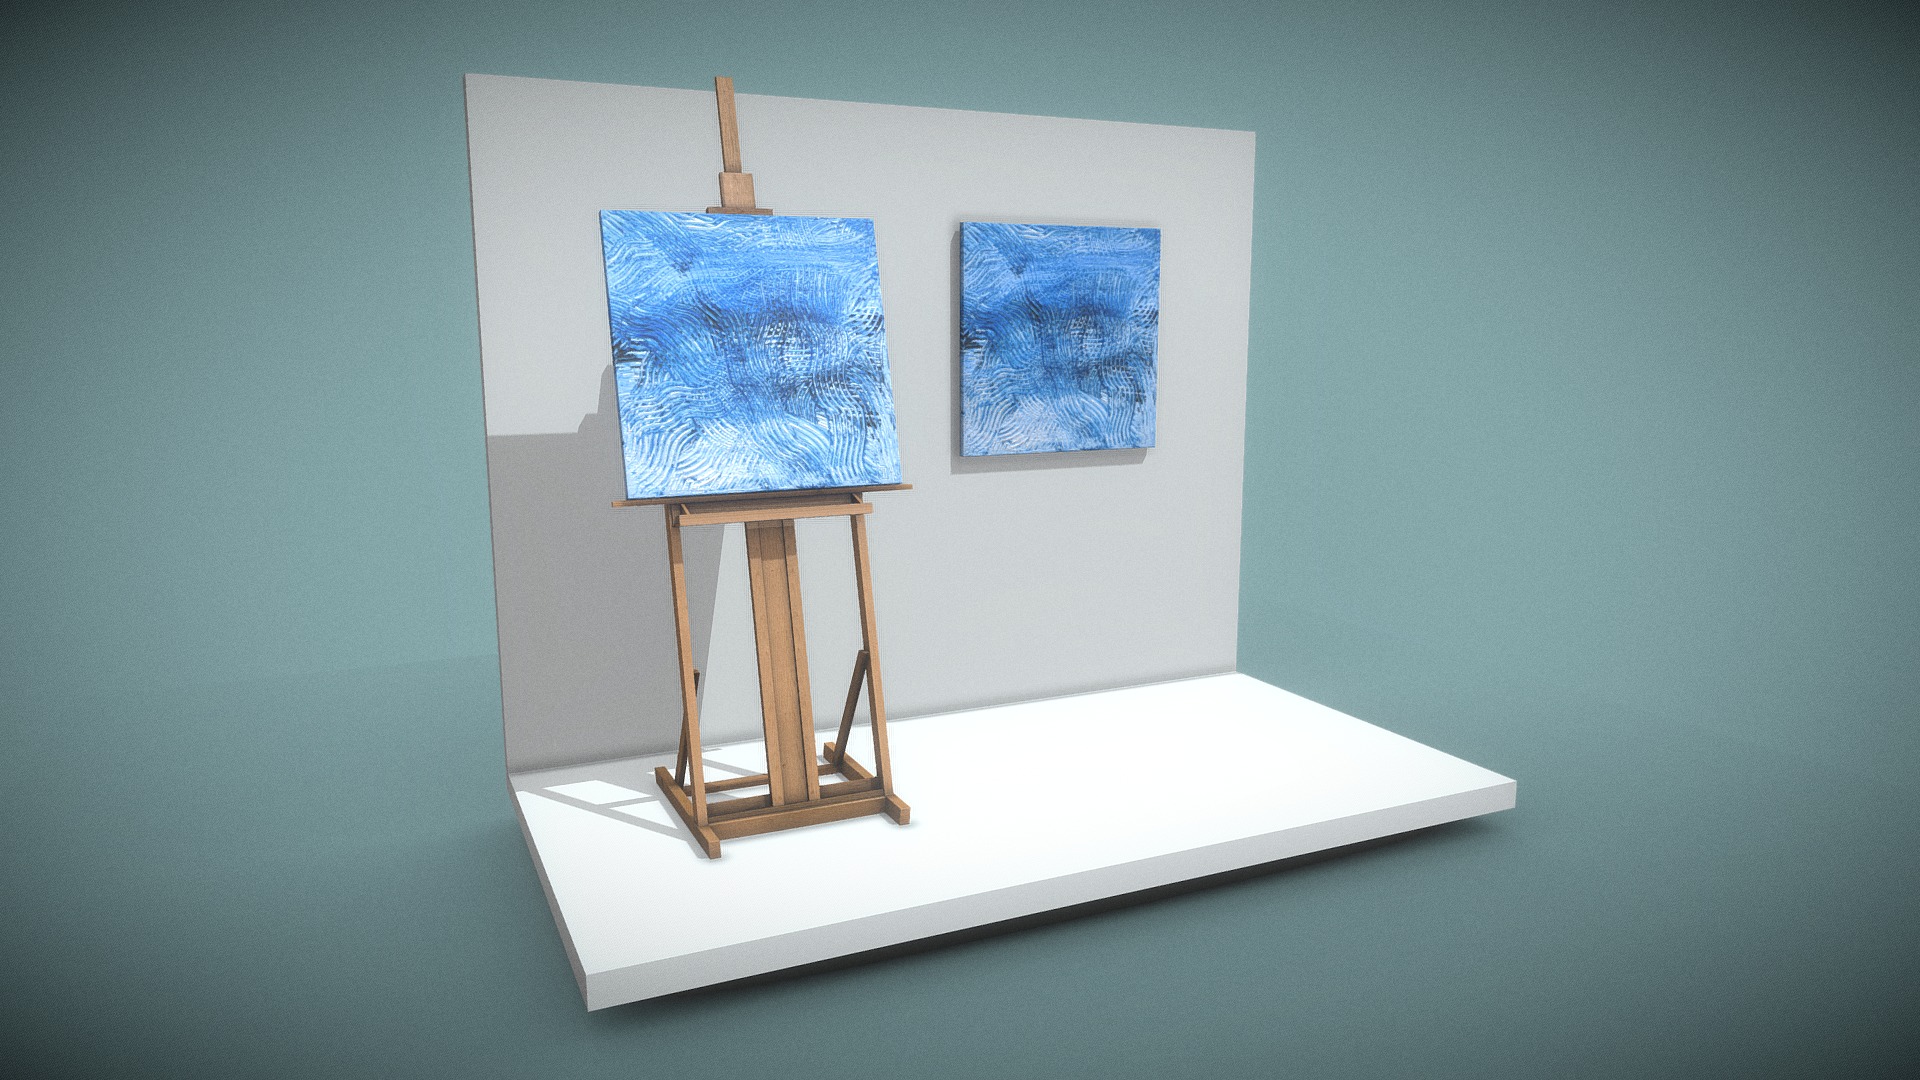 3D model Blue Transformation No.2 – Oil Painting - This is a 3D model of the Blue Transformation No.2 - Oil Painting. The 3D model is about a painting on a easel.